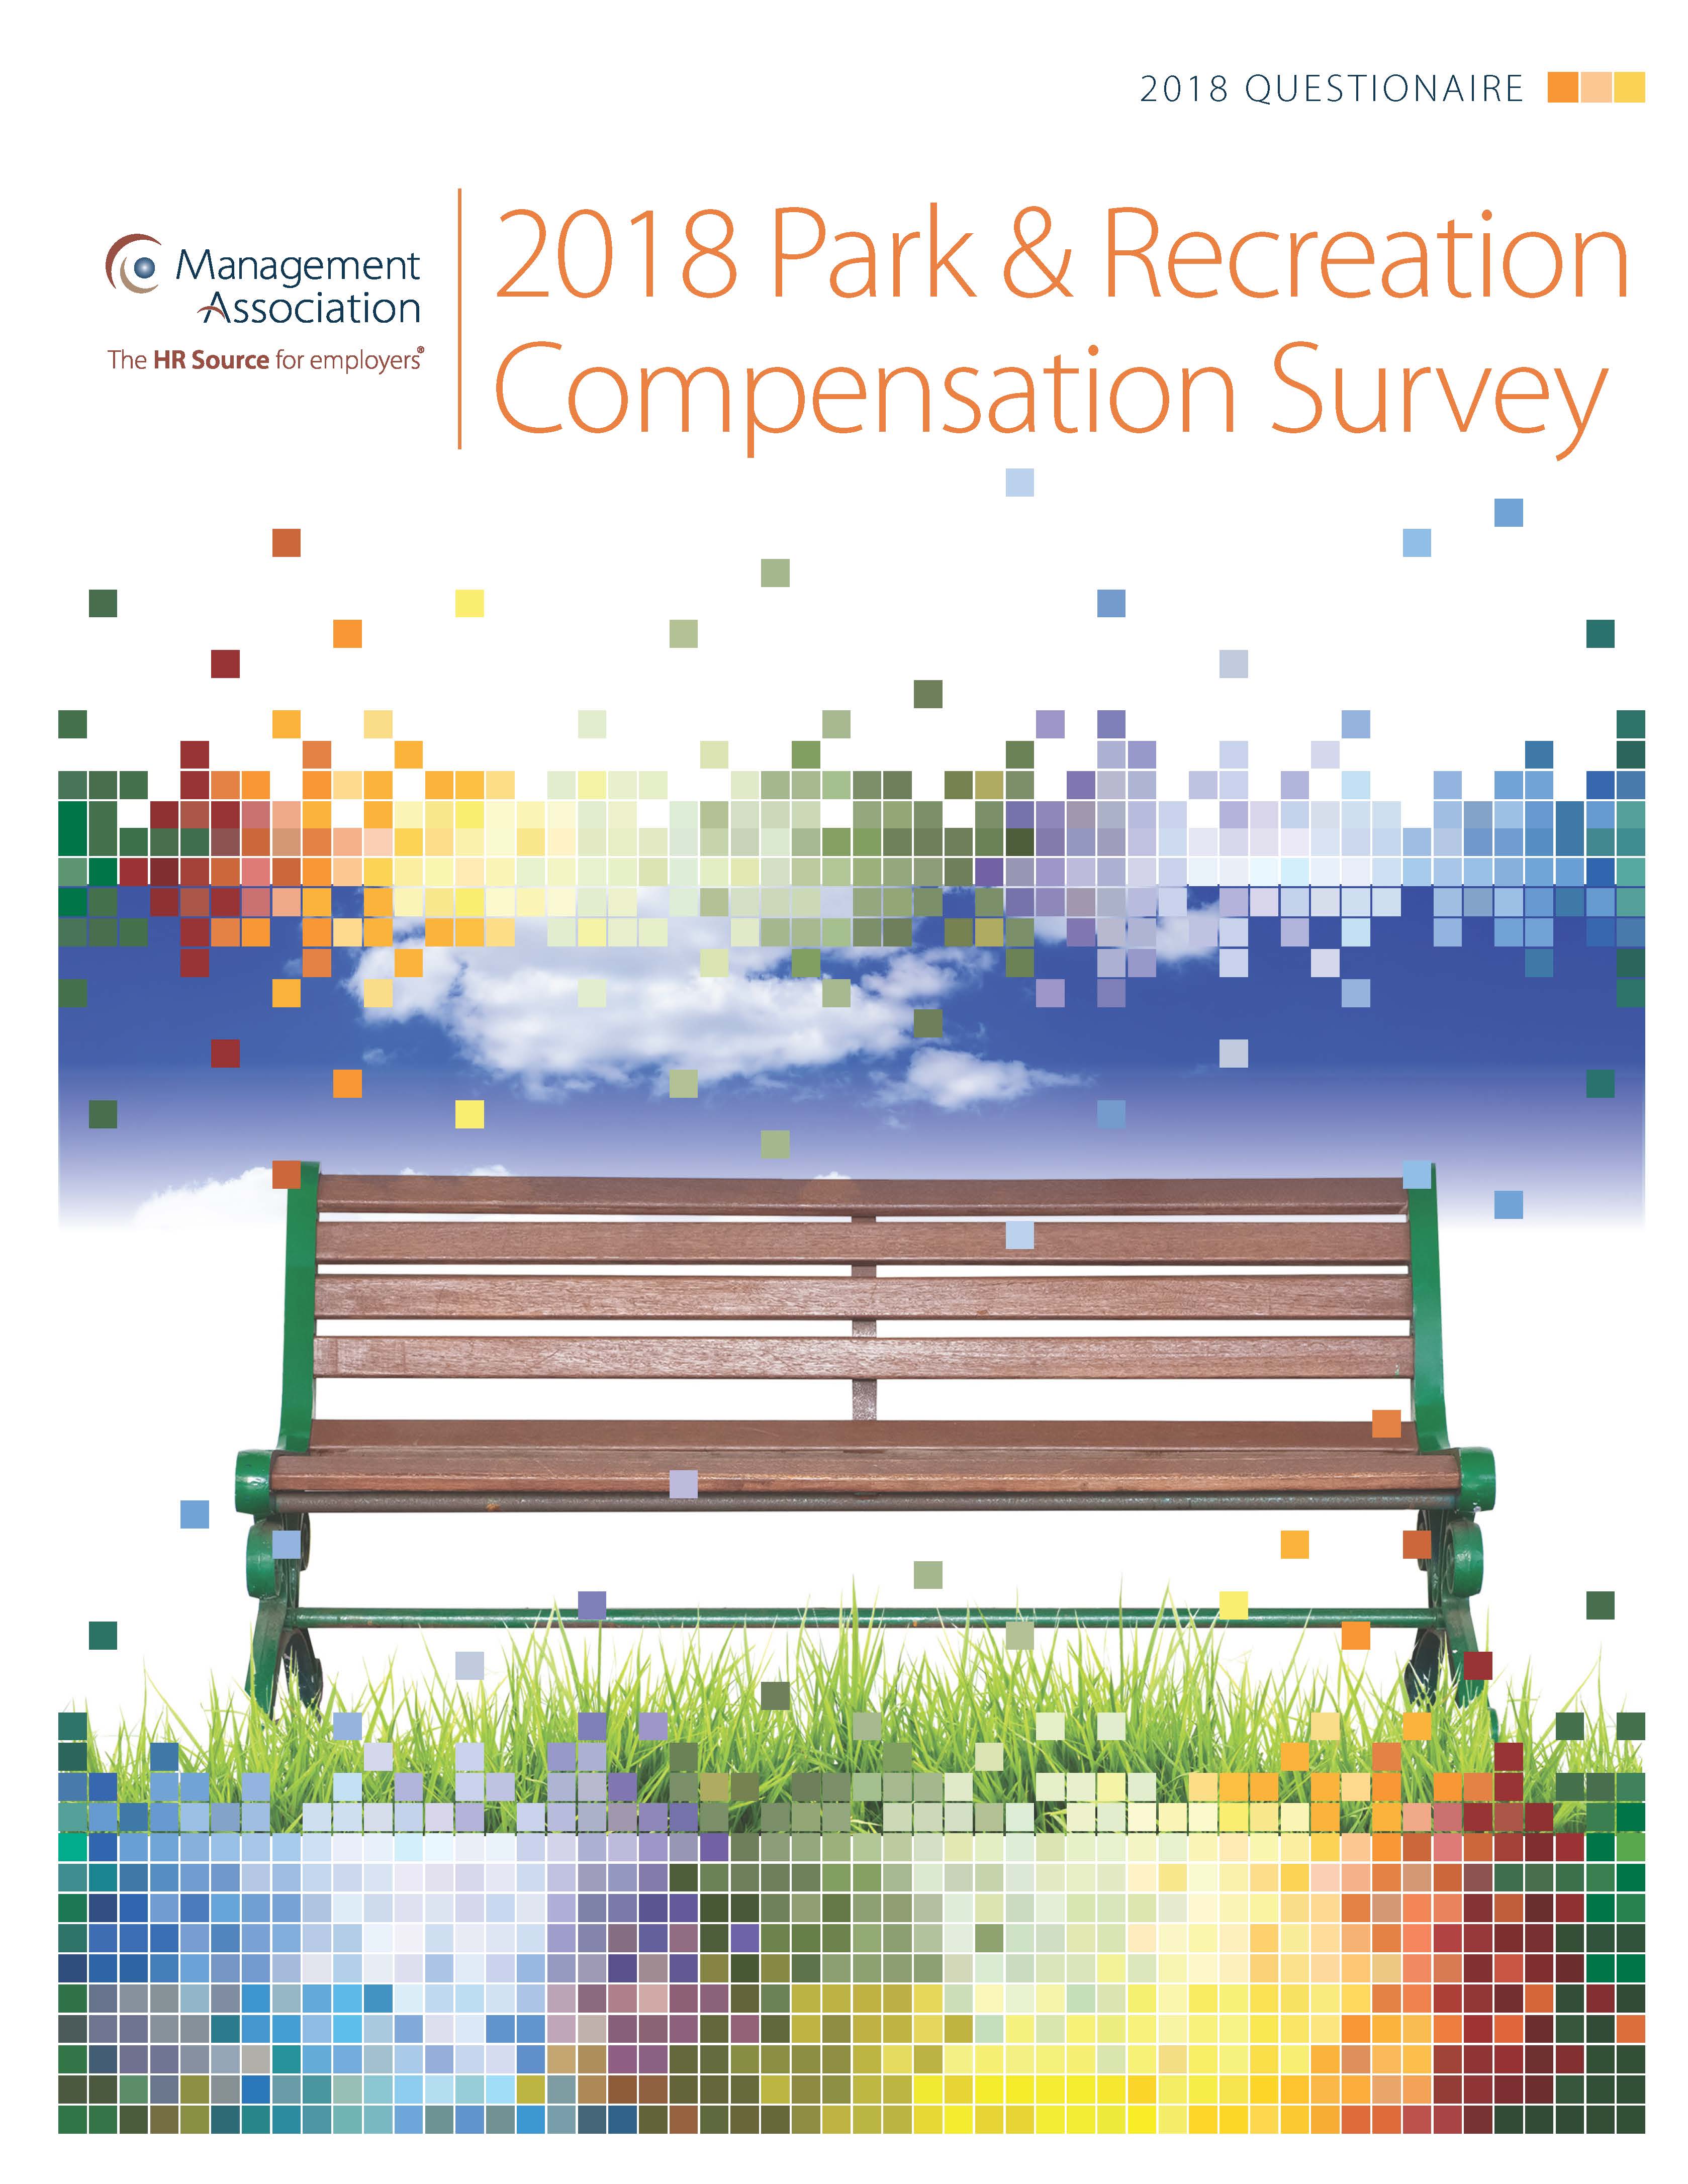 New Park and Recreation Compensation Survey Released